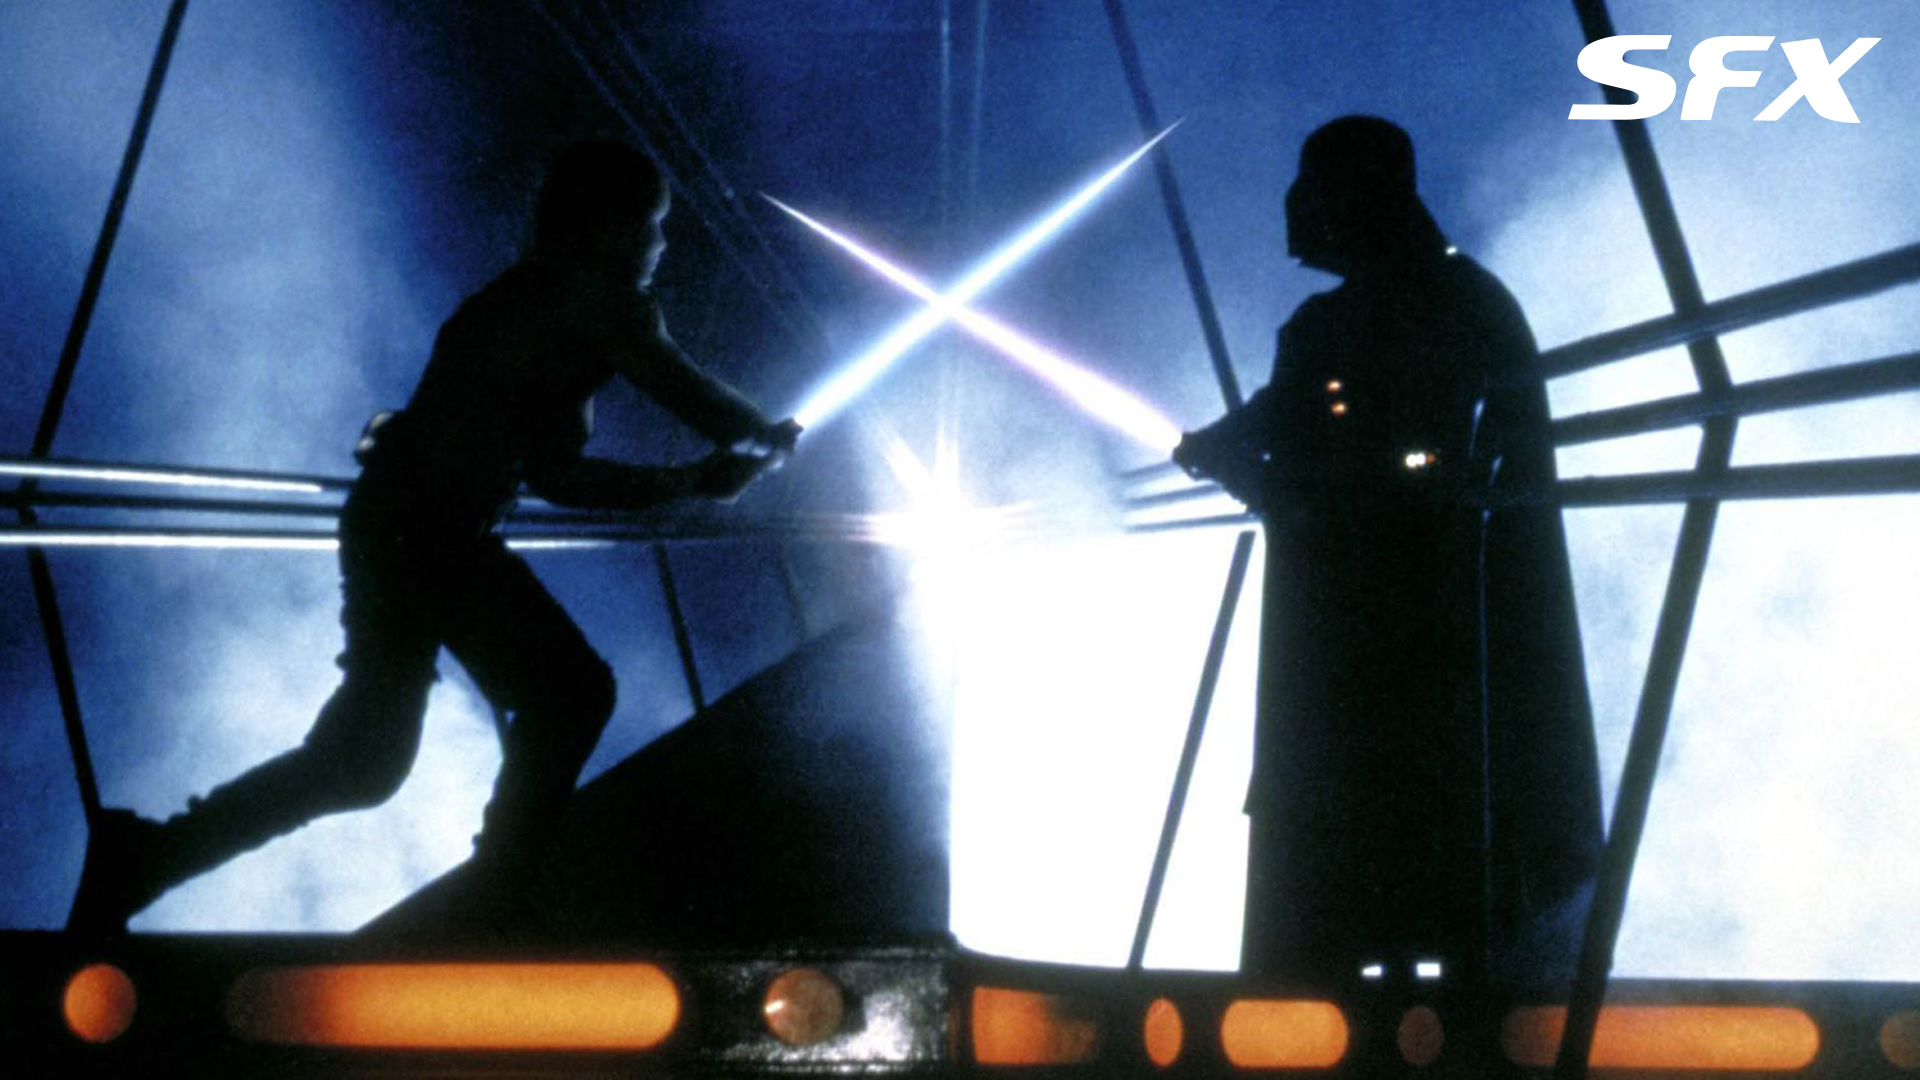 Mark Hamill Remembers Empire Strikes Back As The Most 'Grueling